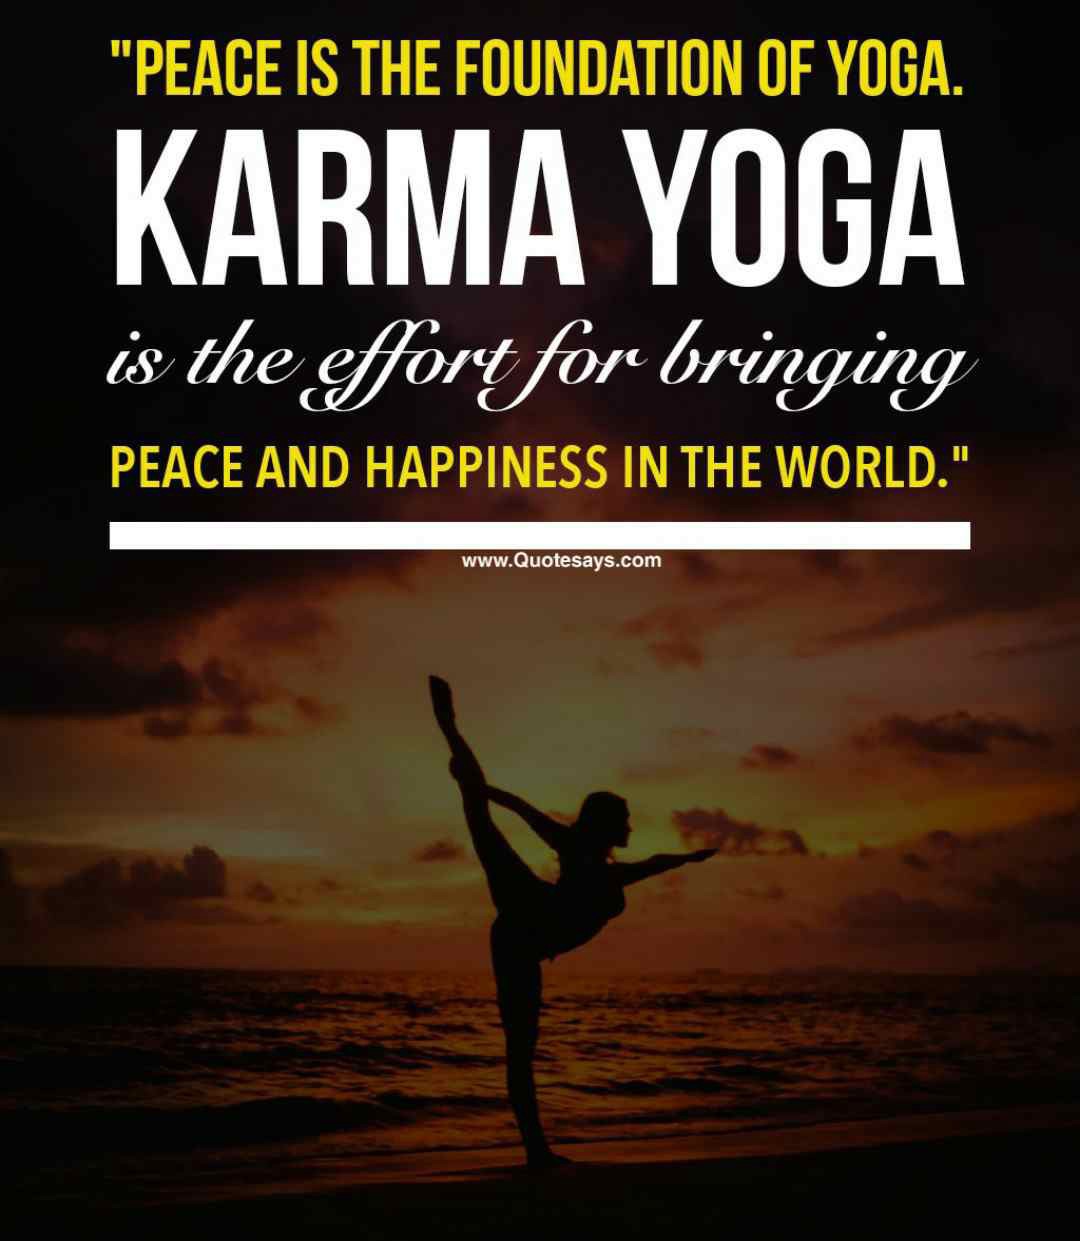 peace is the foundation of yoga. karma yoga is the effort for bringing peace and happiness in the world